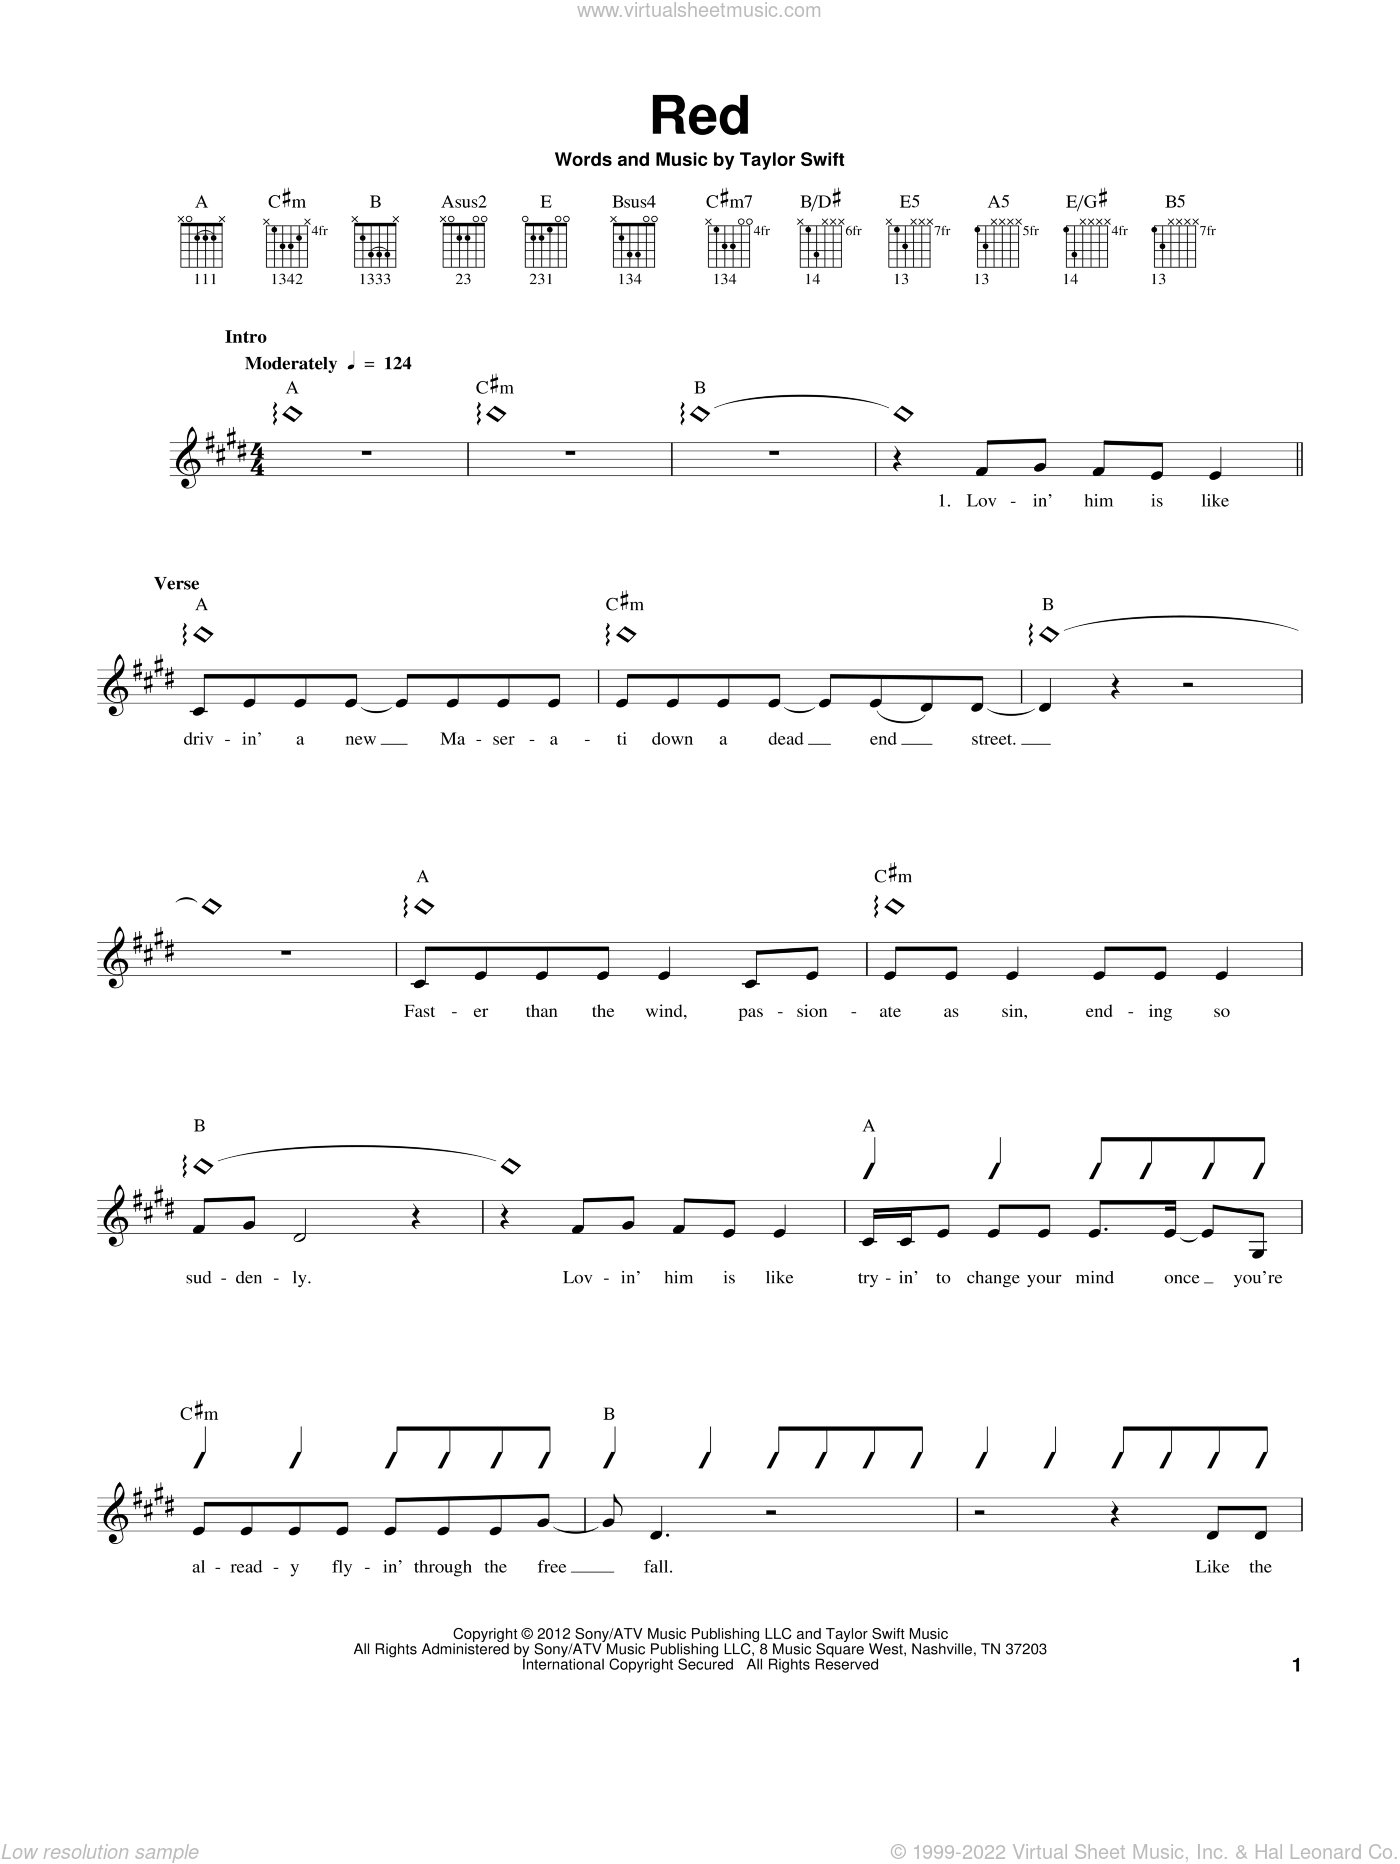 Red by taylor swift guitar chords